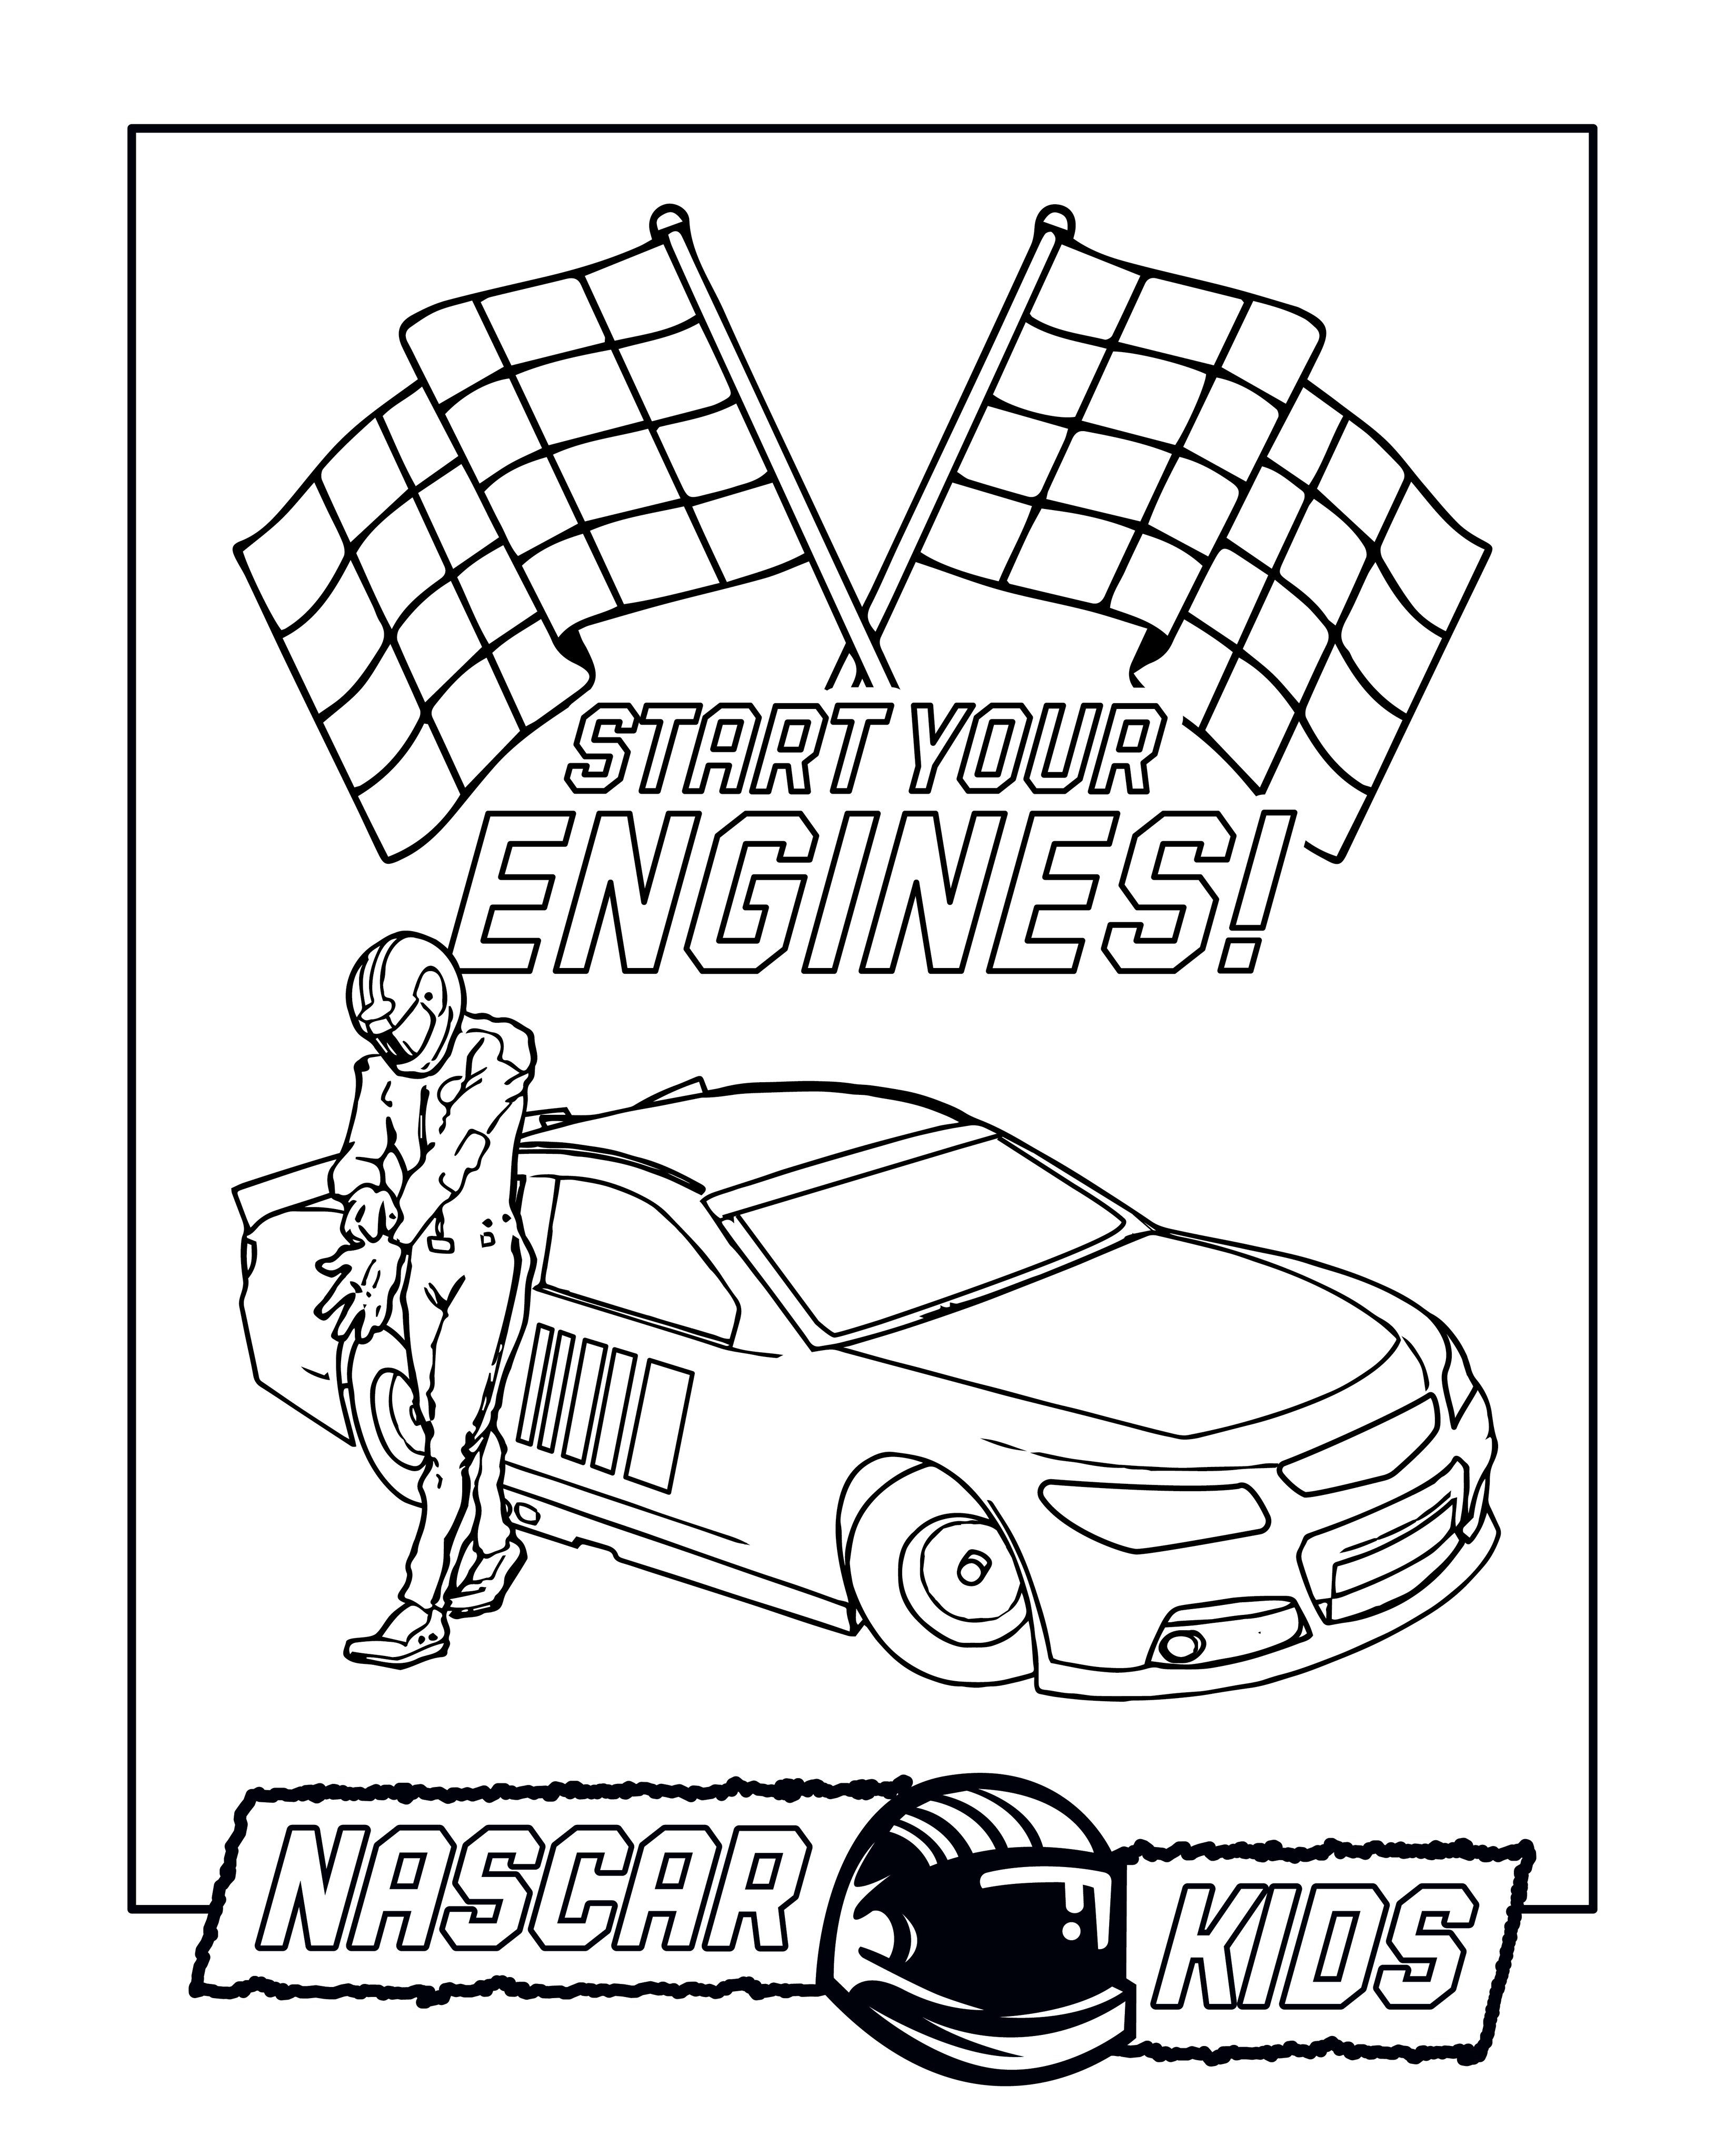 Nascar nation on x happy coloringbookday ð lets see your works of art ð nascarkids httpstcohdgxylxumq x